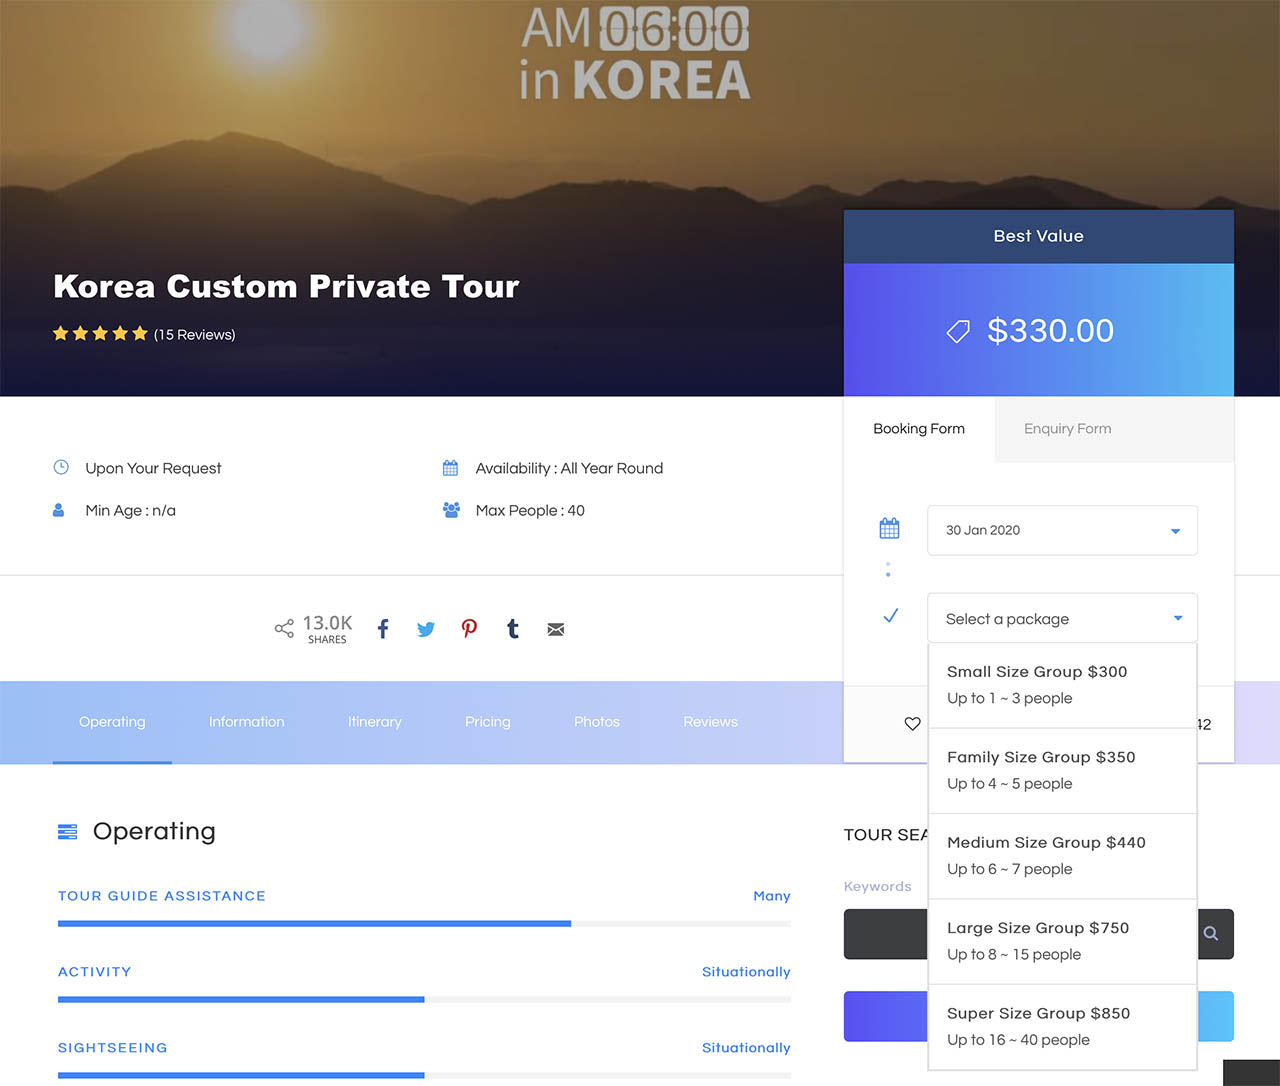 How to book your Korea custom private tour online